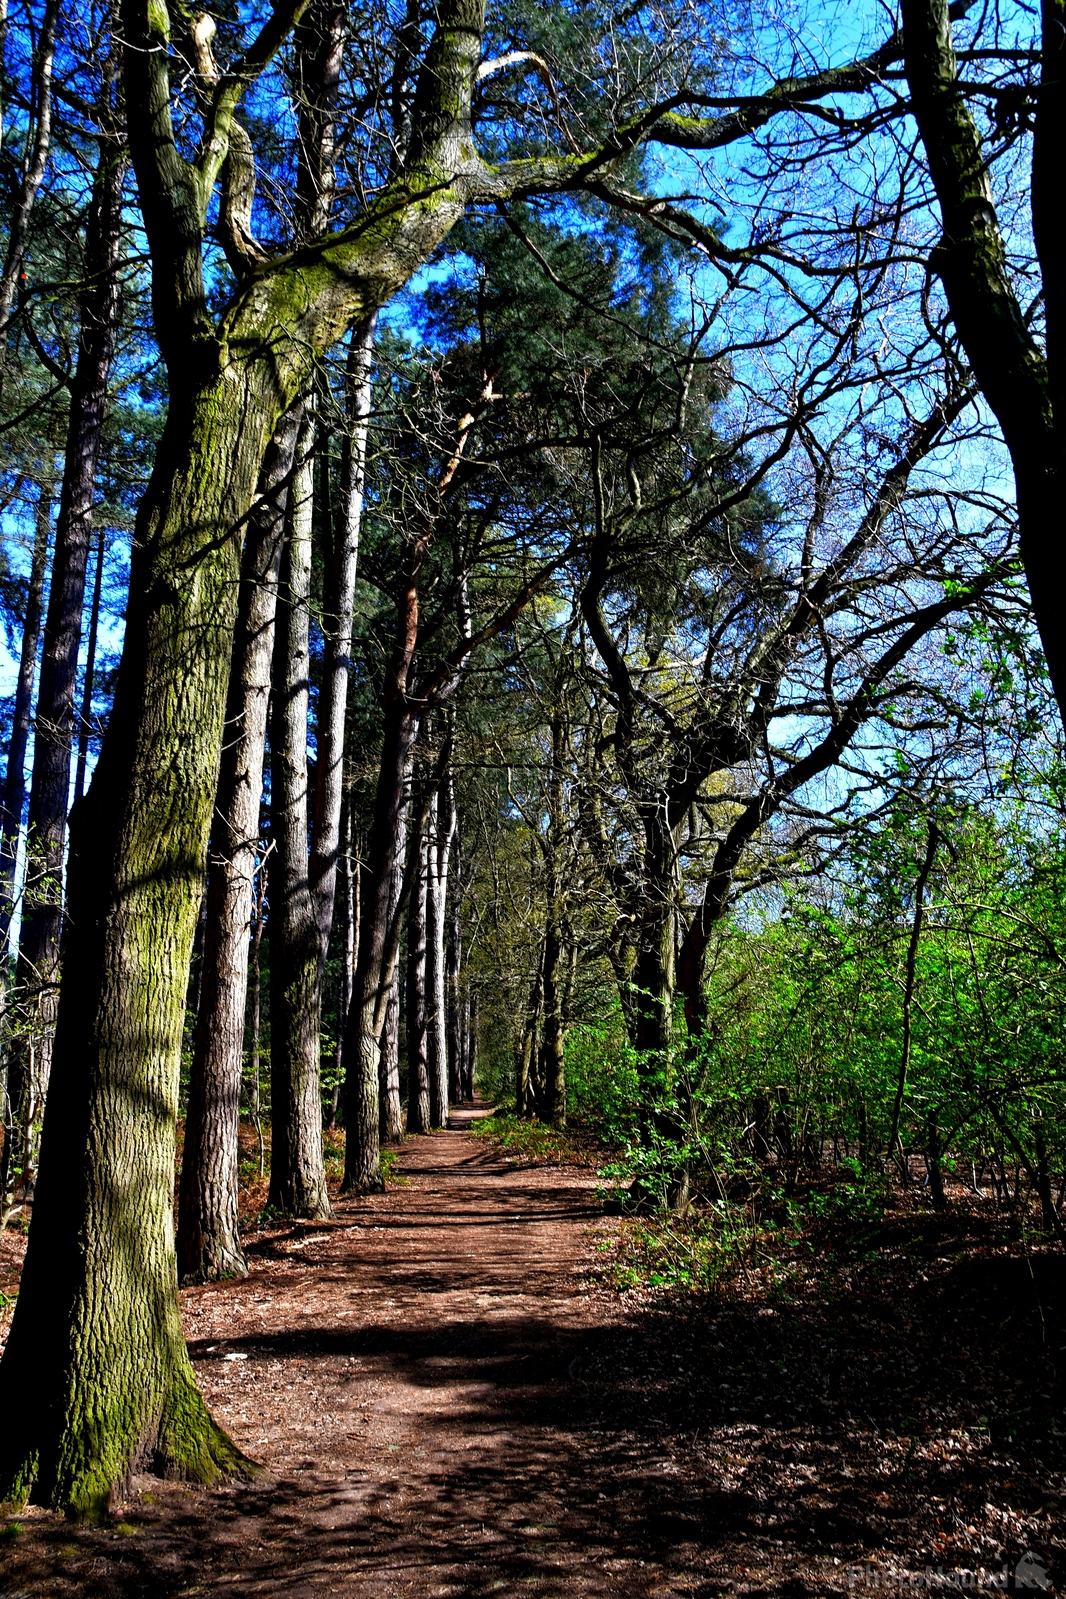 Image of Delamere Forest by Philip Eptlett